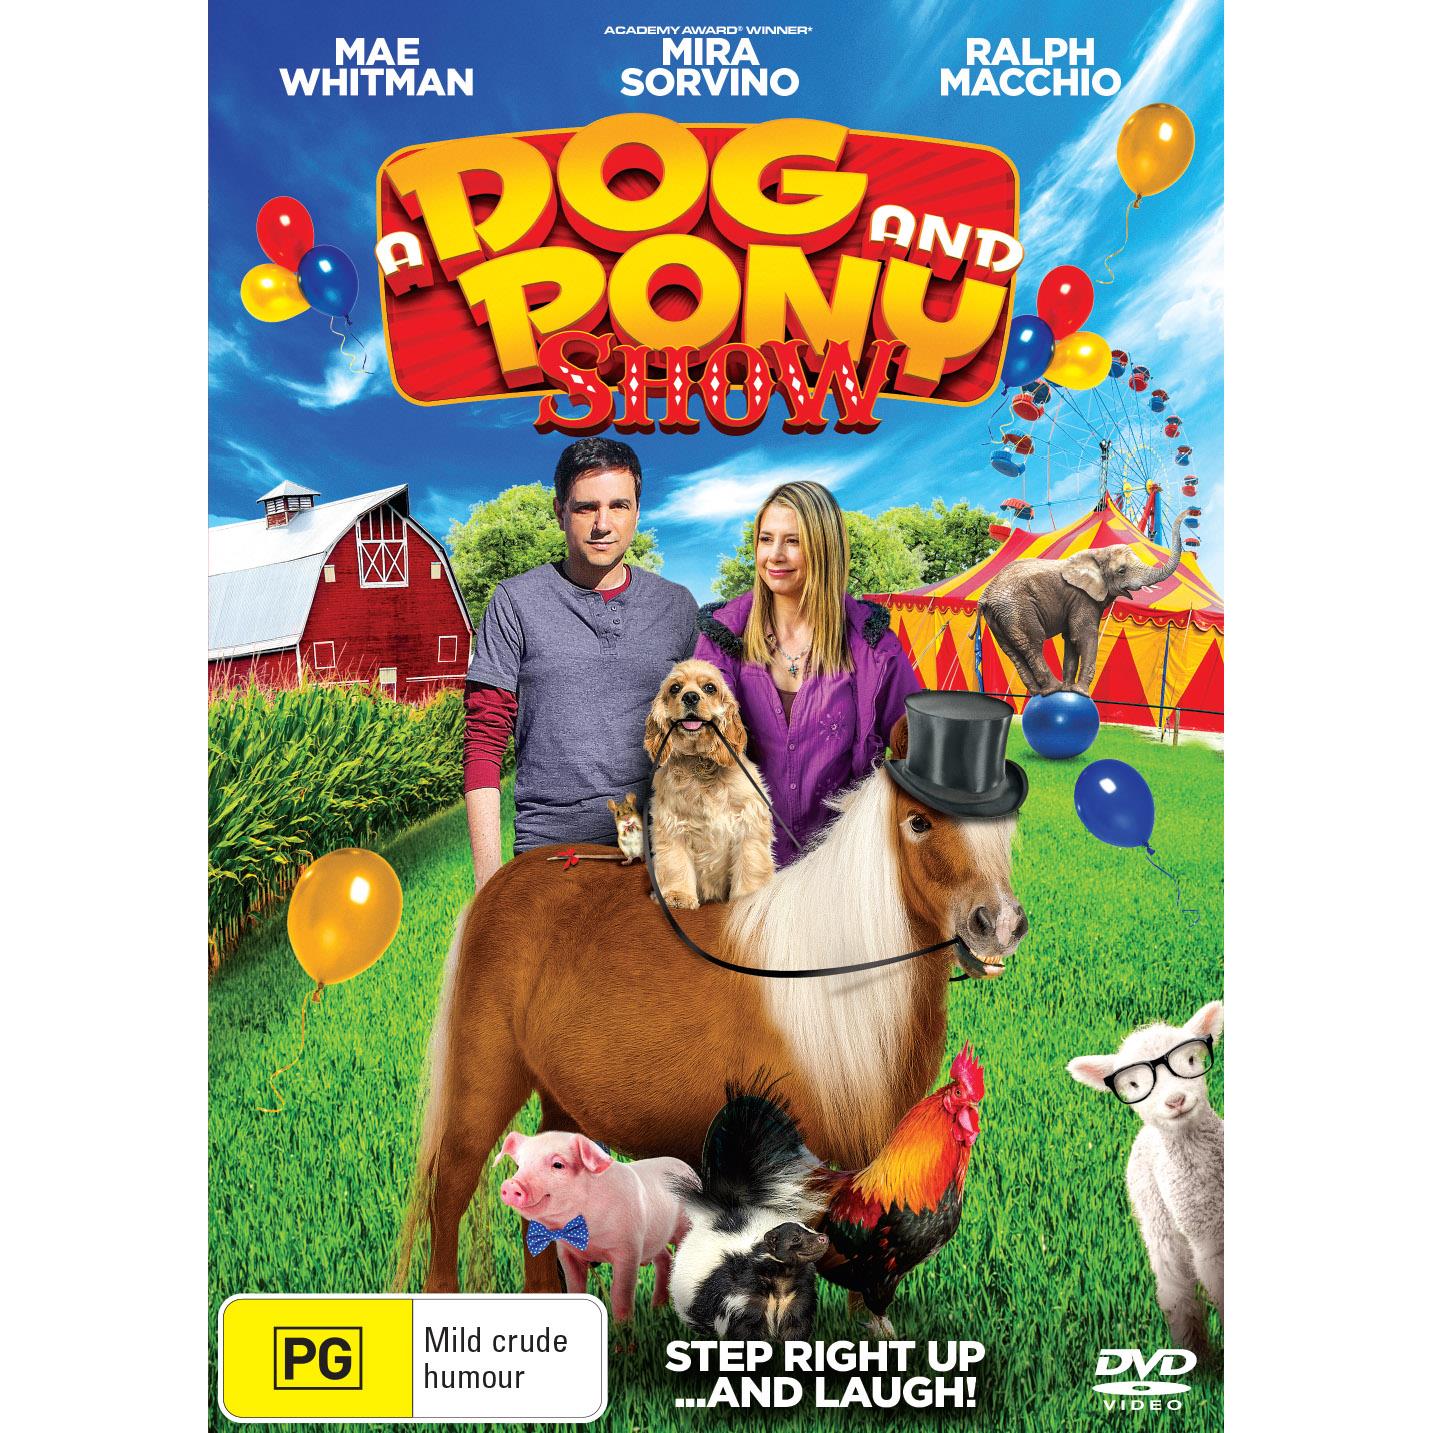 dog and pony show, a